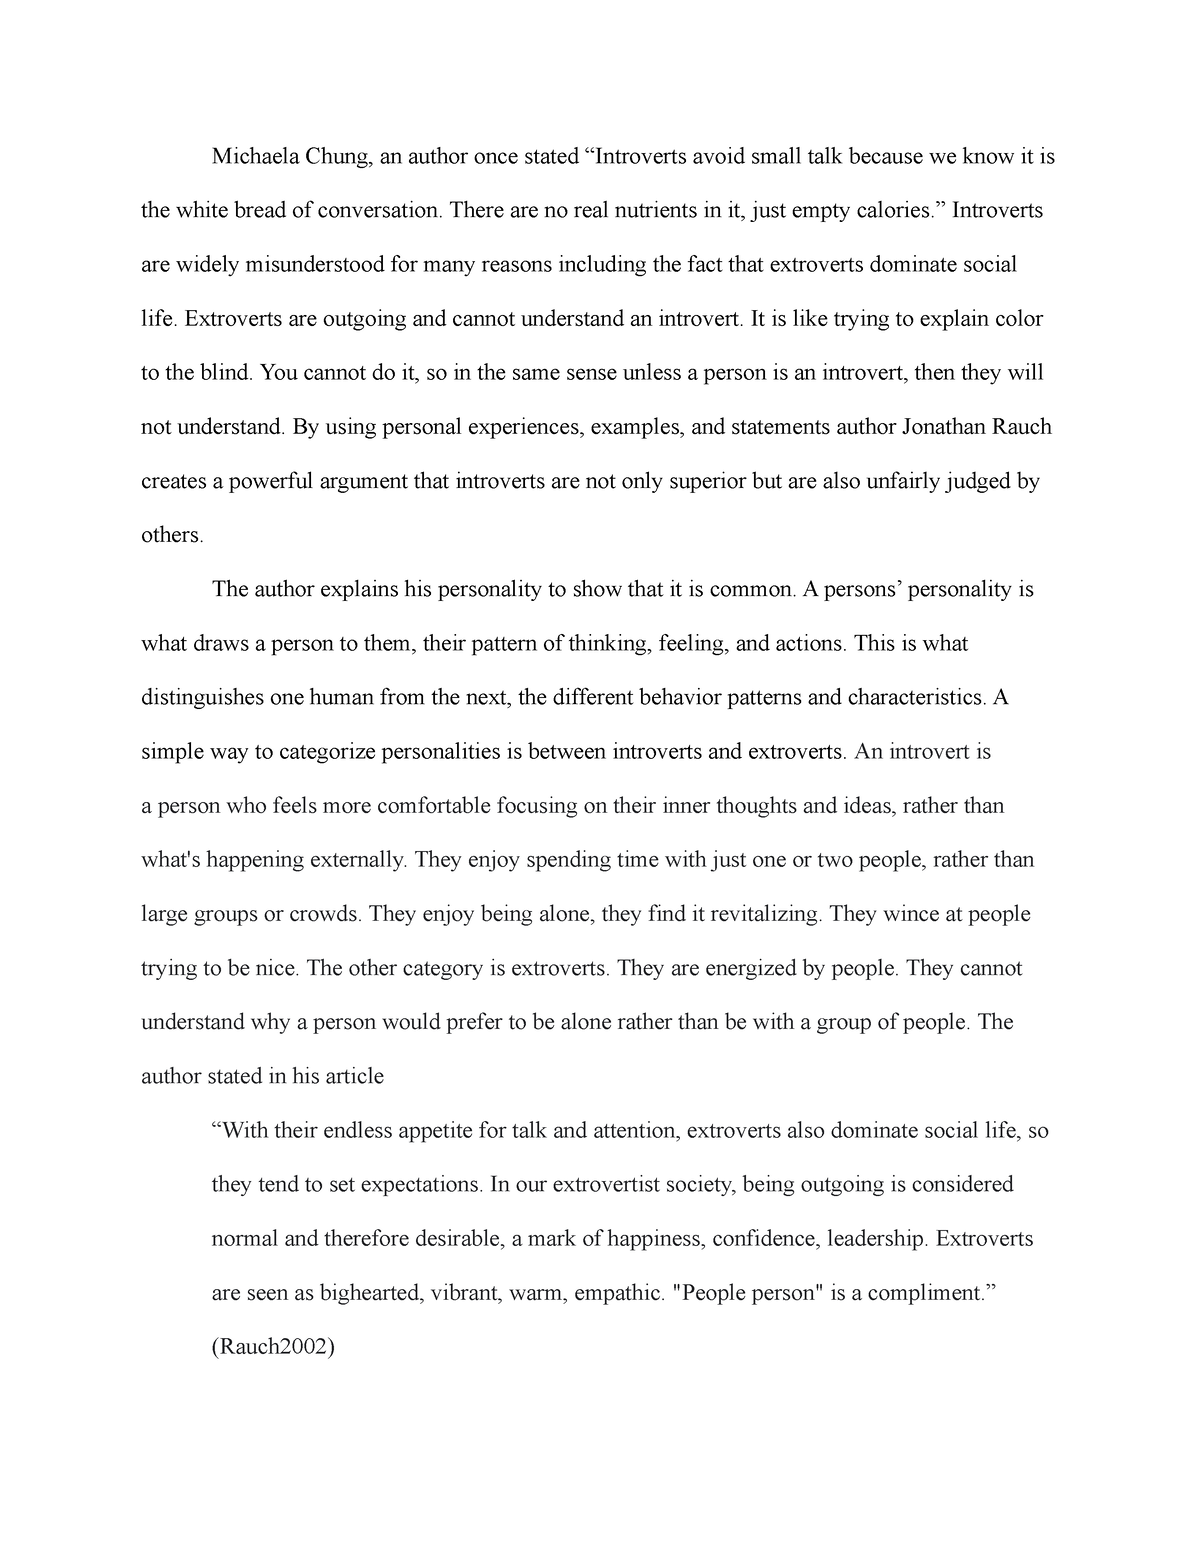 first draft of critical analysis essay caring for your introvert